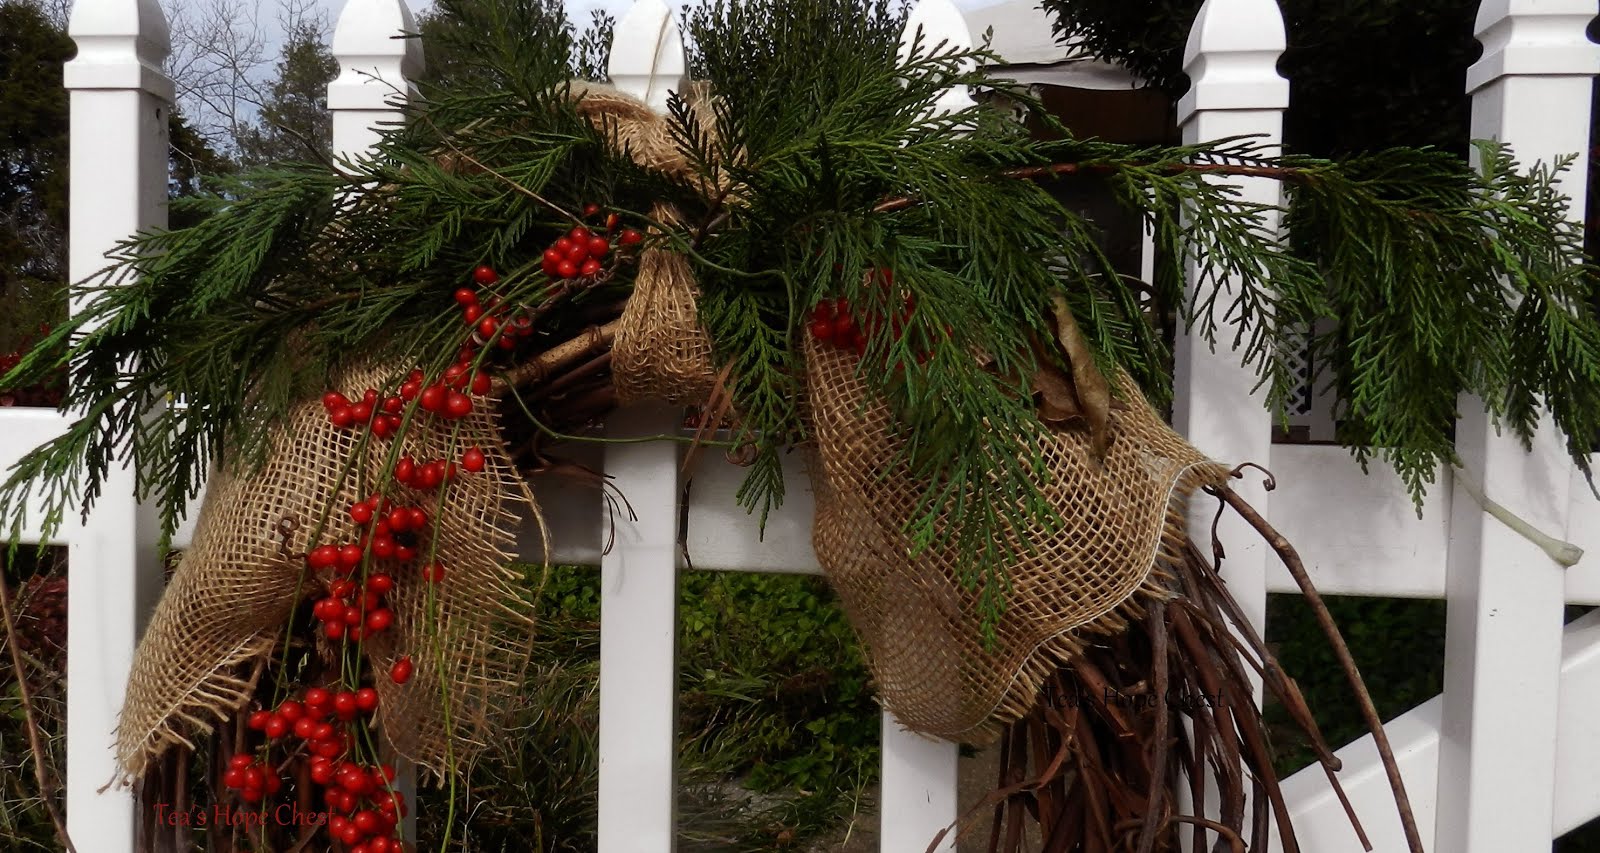 ~~Tea's Hope Chest~~: Grapevine wreaths and memory of Mickey~